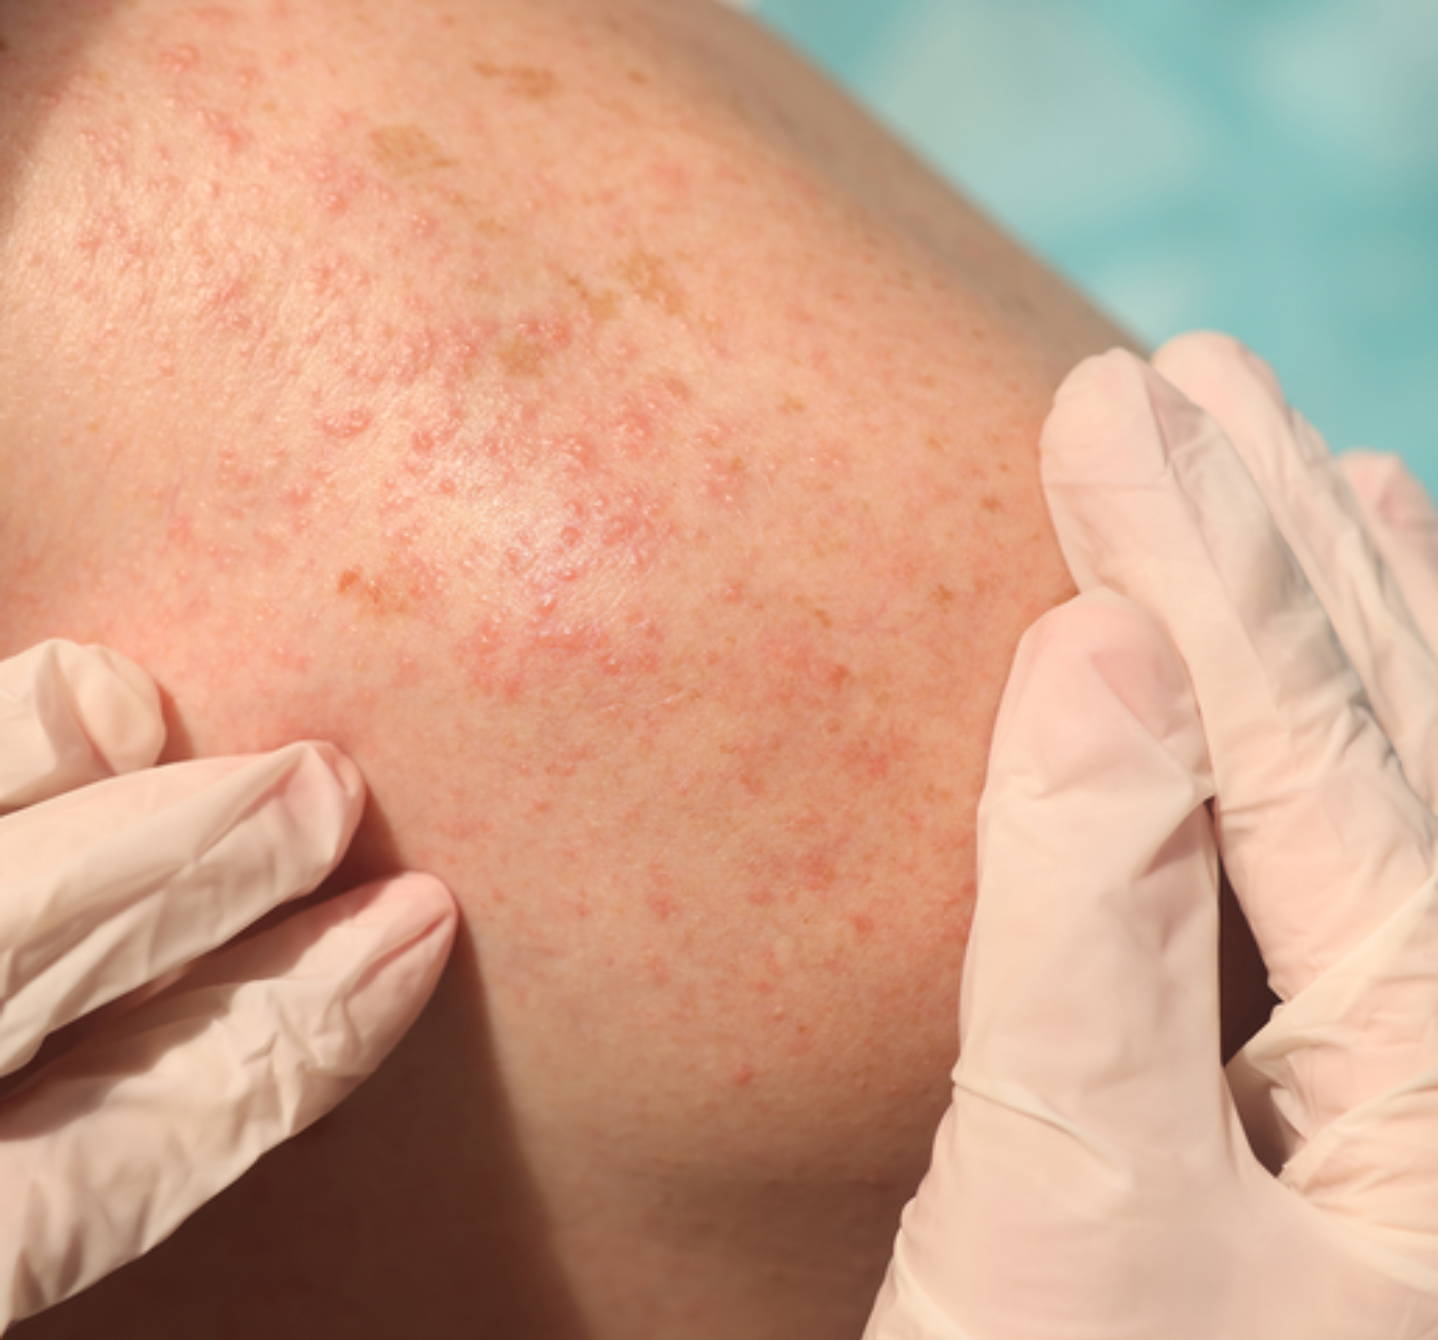 Close up of a shoulder with a rash being inspected by someone in surgical gloves. It could be allergic reaction heat rash.